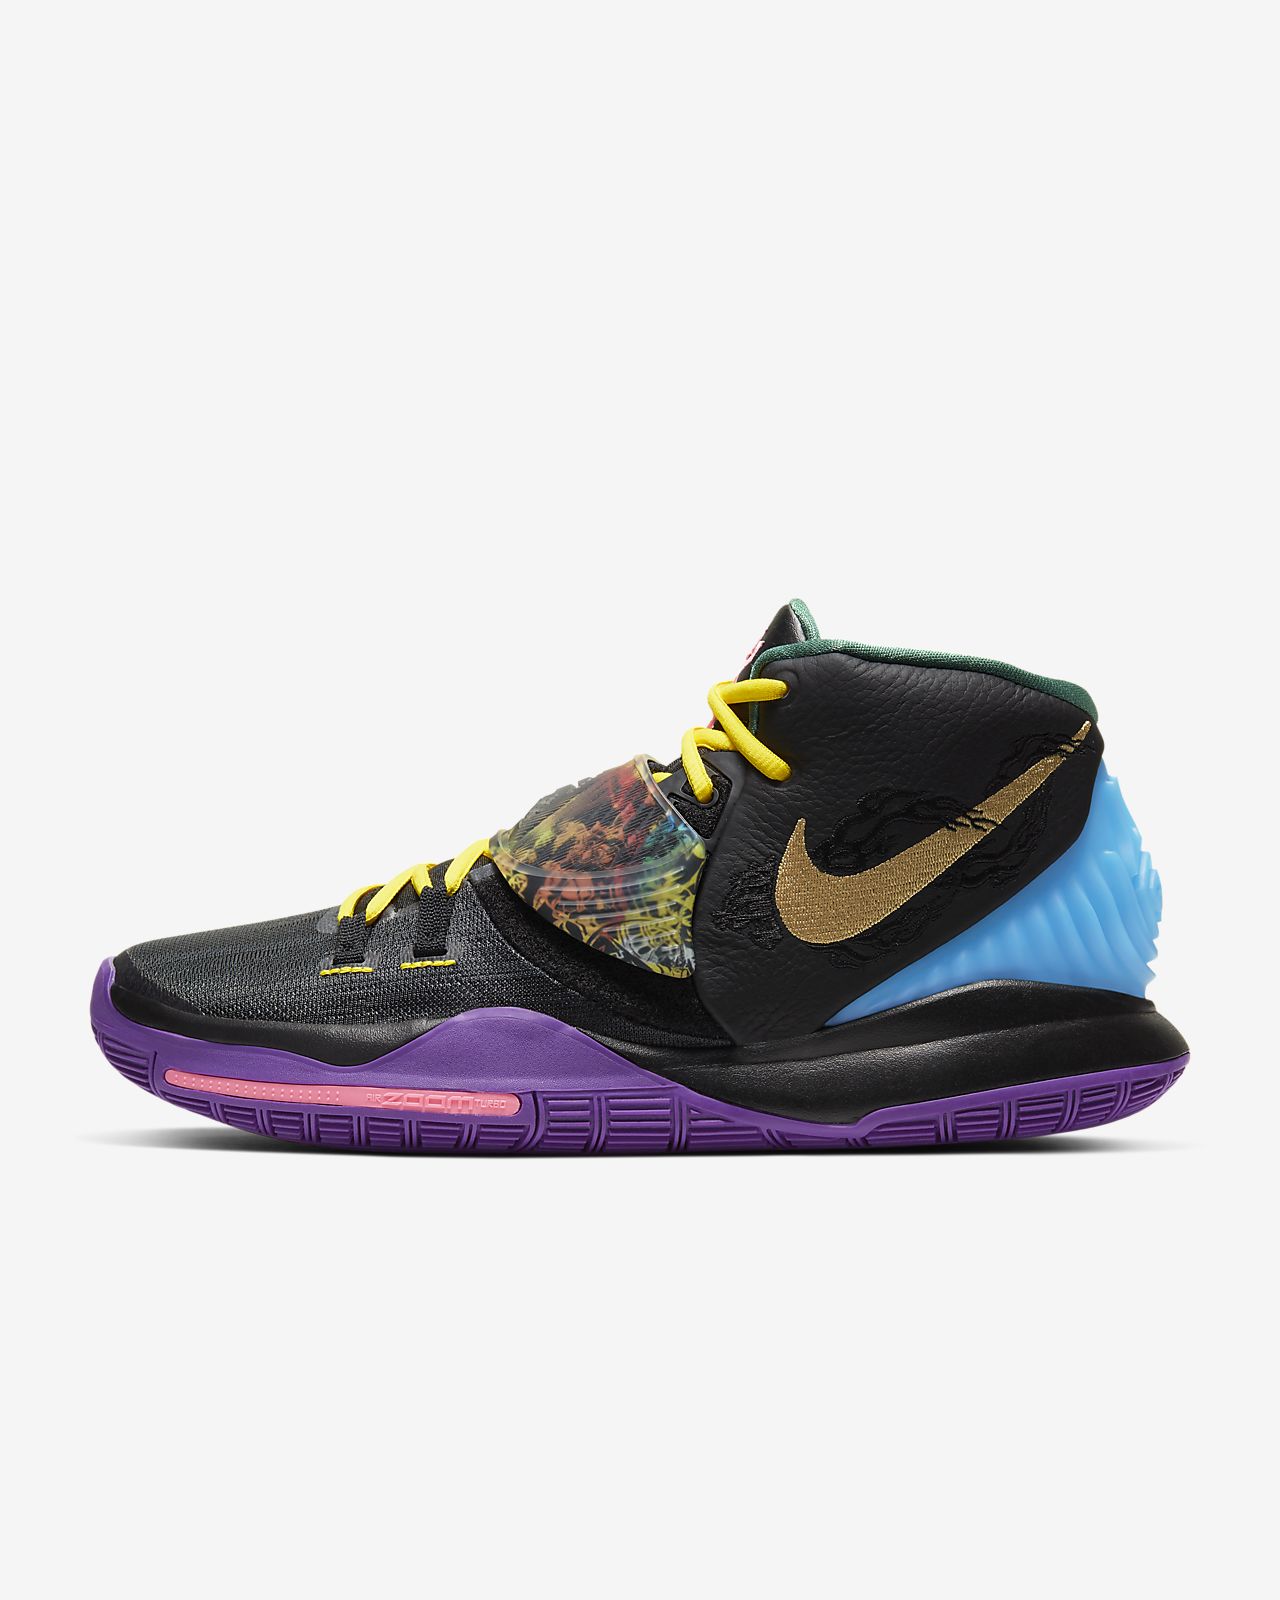 kyrie chinese new year cheap online